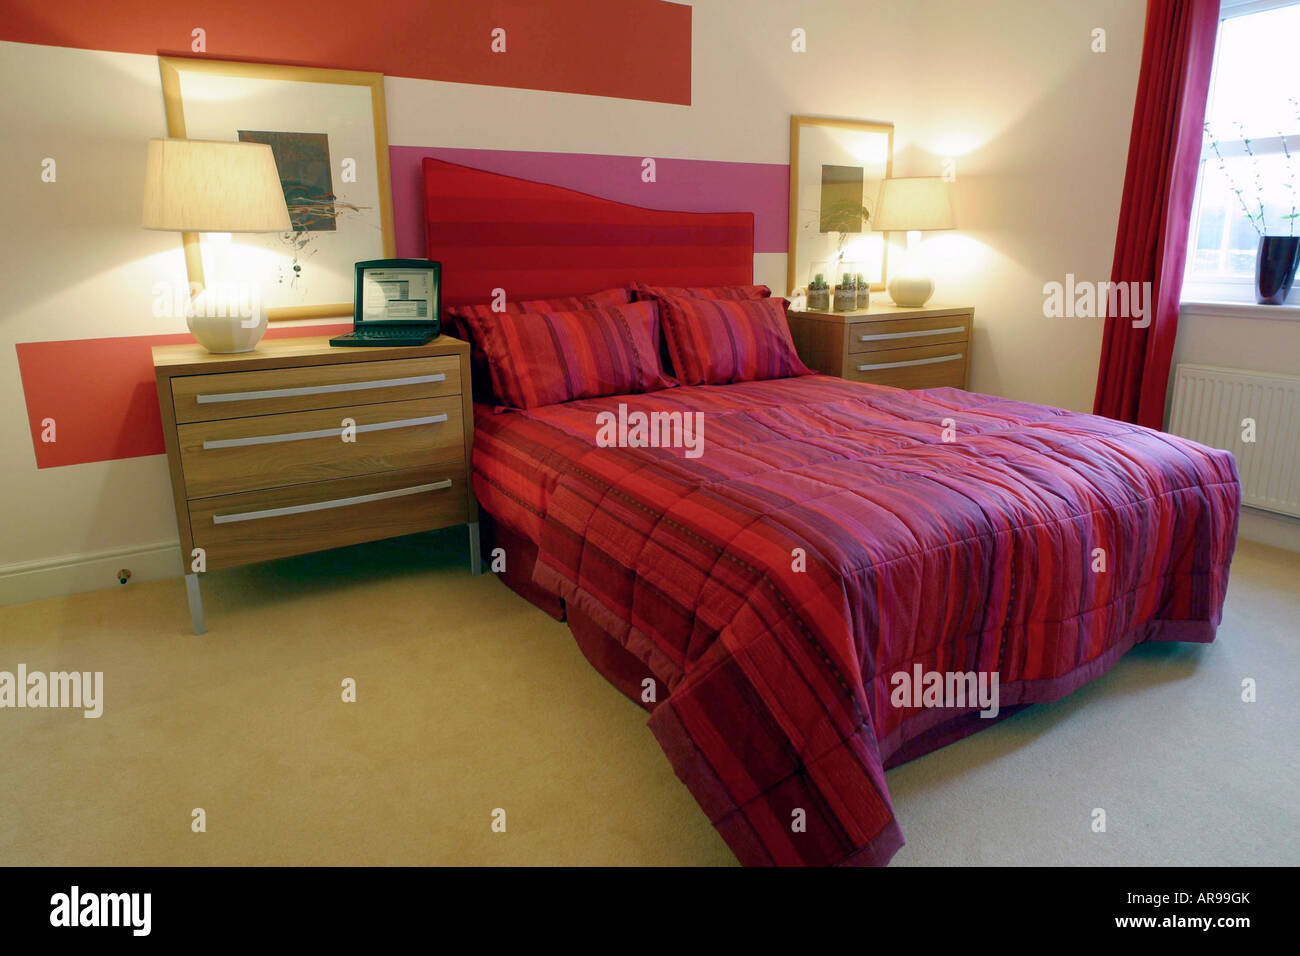 INTERIOR OF MODERN BEDROOM IN RED AND WHITE Stock Photo - Alamy